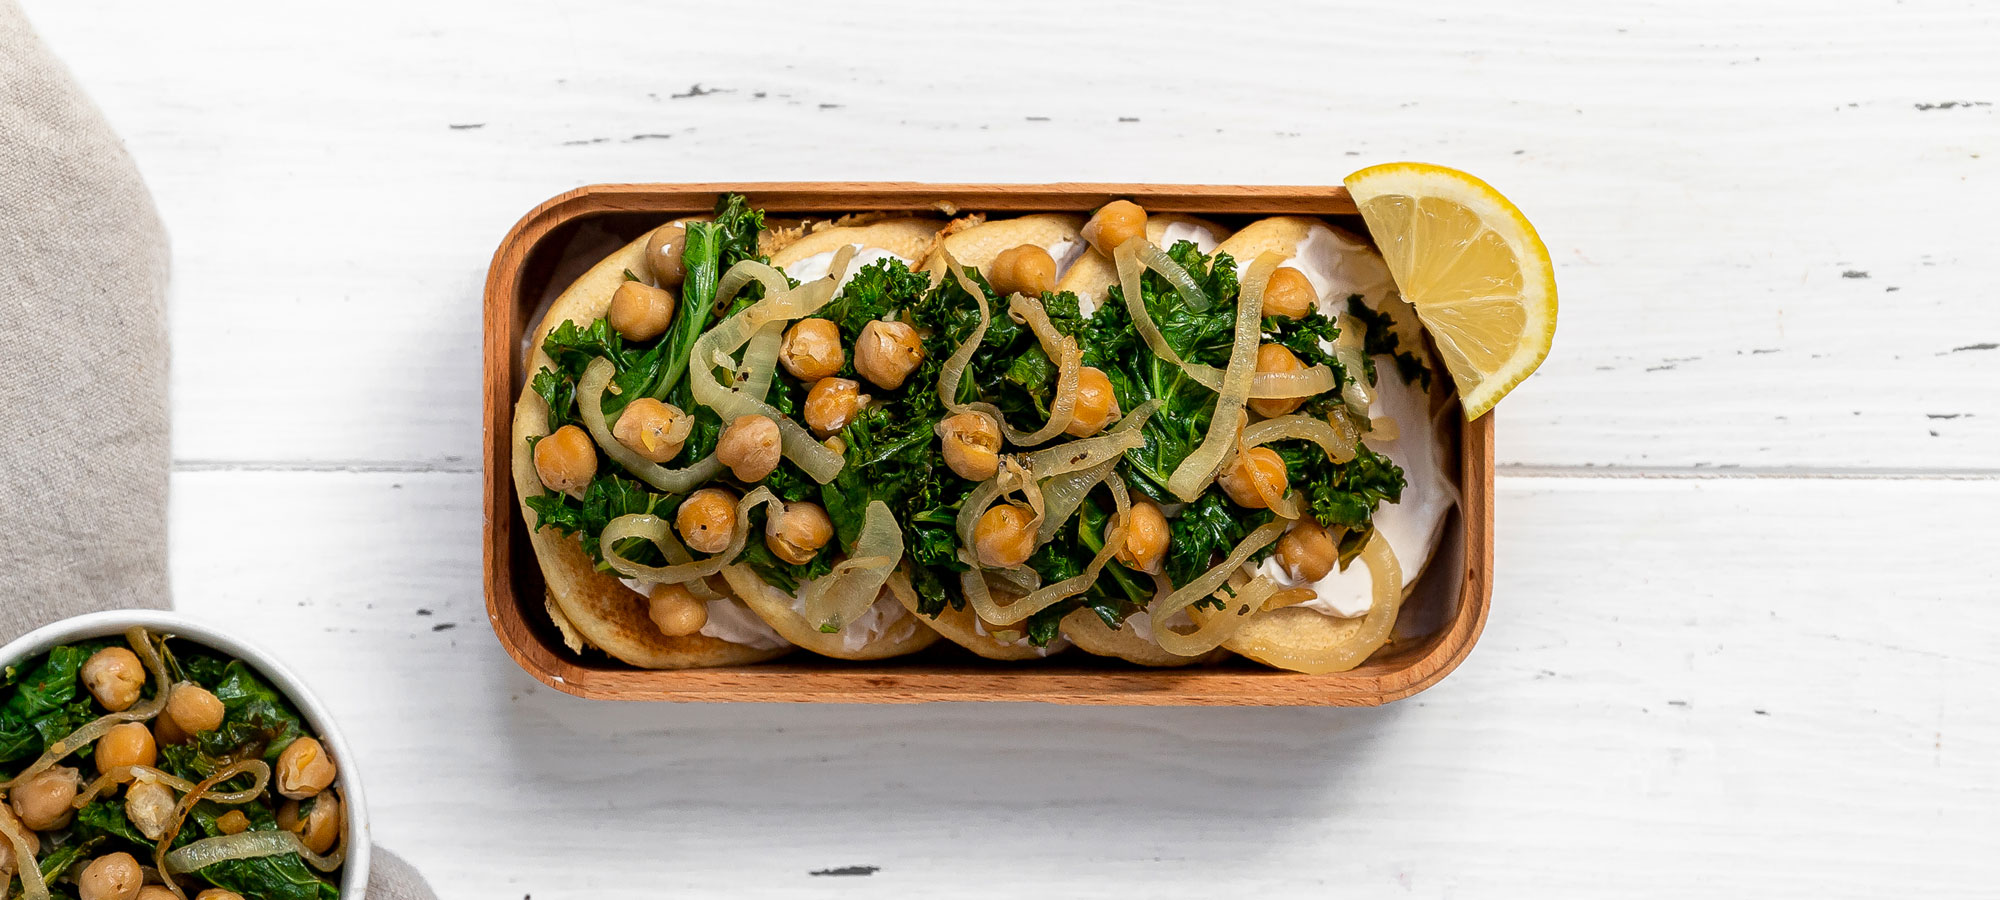 Chickpea pancakes with kale